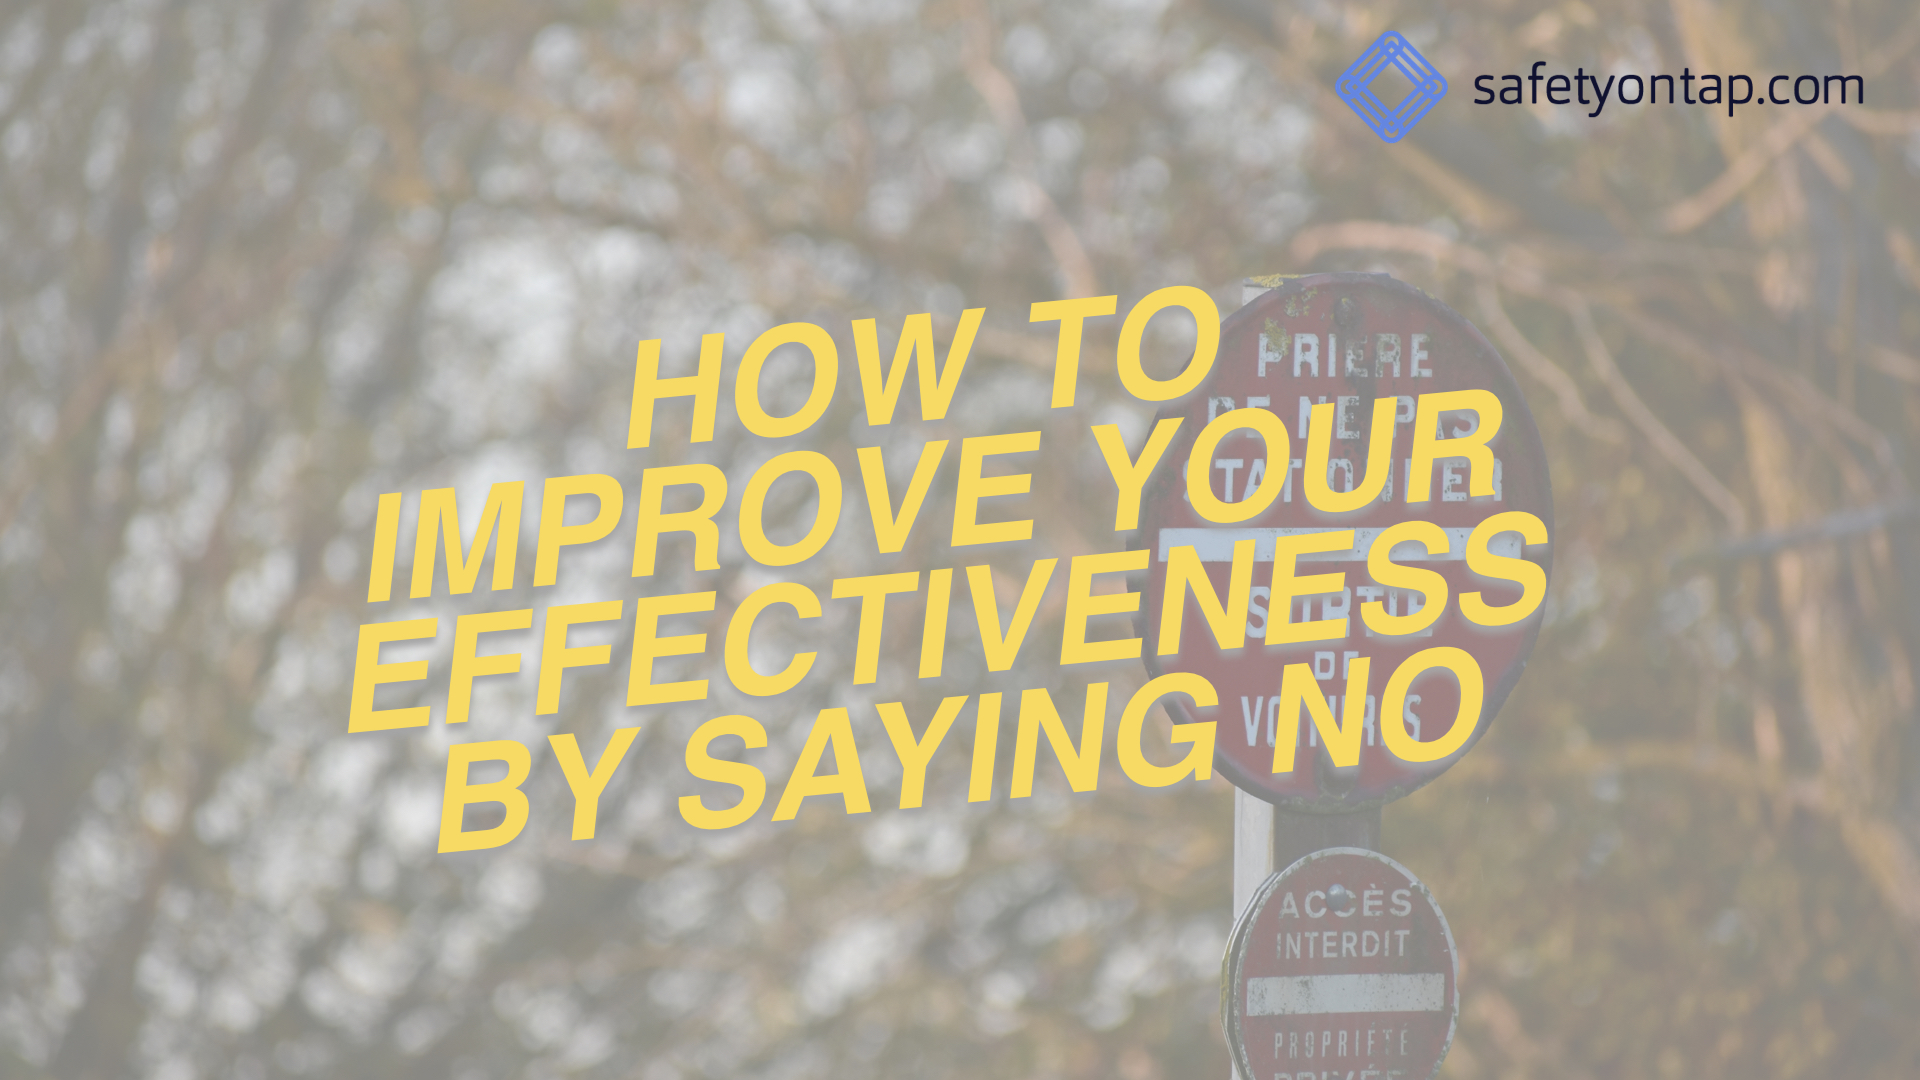 Ep061: How to improve your personal effectiveness by saying NO